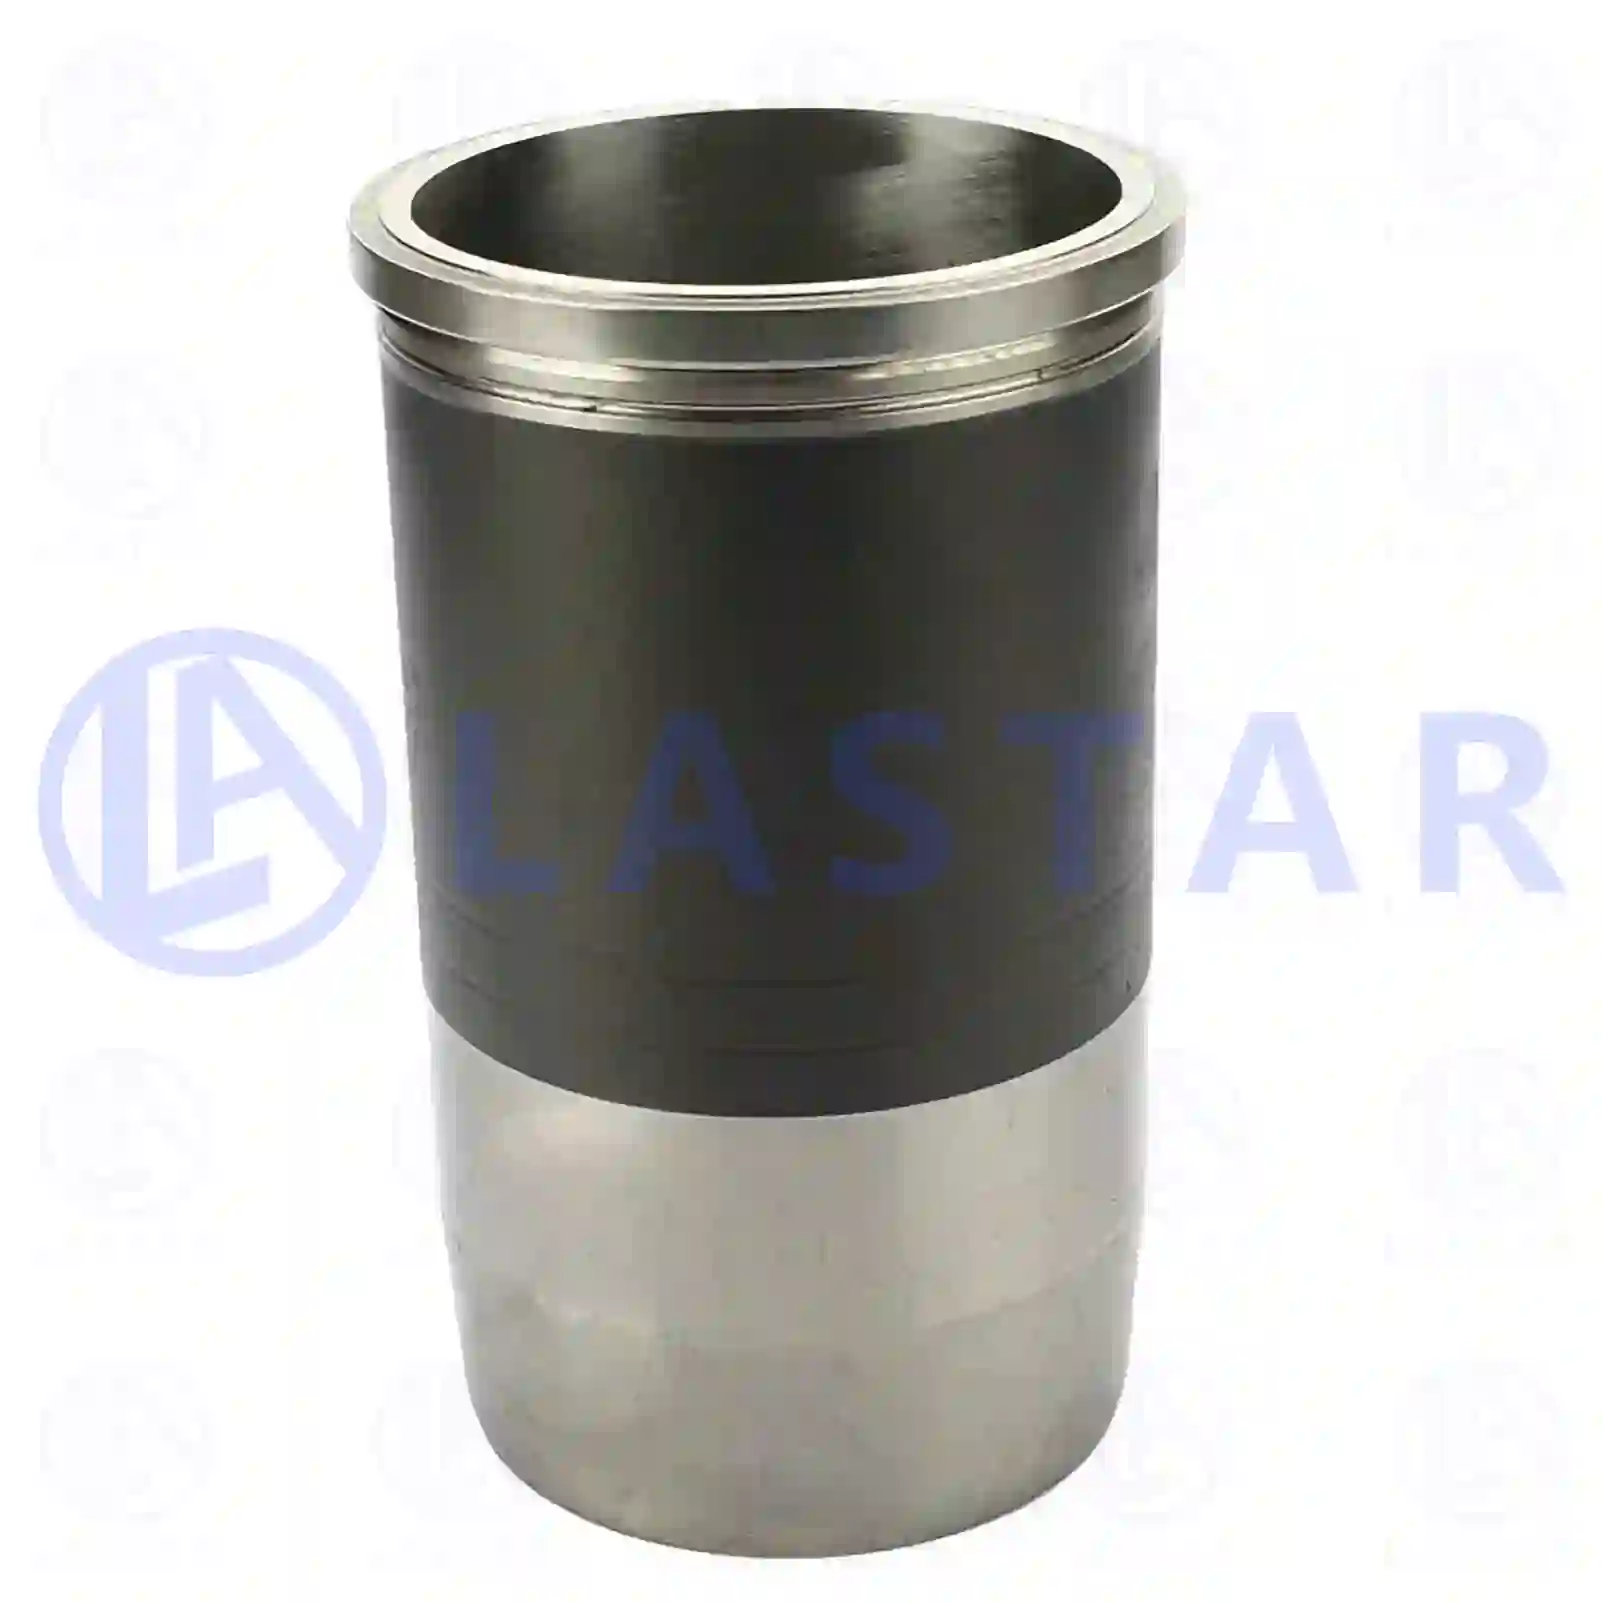 Piston & Liner Cylinder liner, without seal rings, la no: 77701977 ,  oem no:4420110010, 4420110110, 4420110310, 4440110010, ZG01081-0008 Lastar Spare Part | Truck Spare Parts, Auotomotive Spare Parts